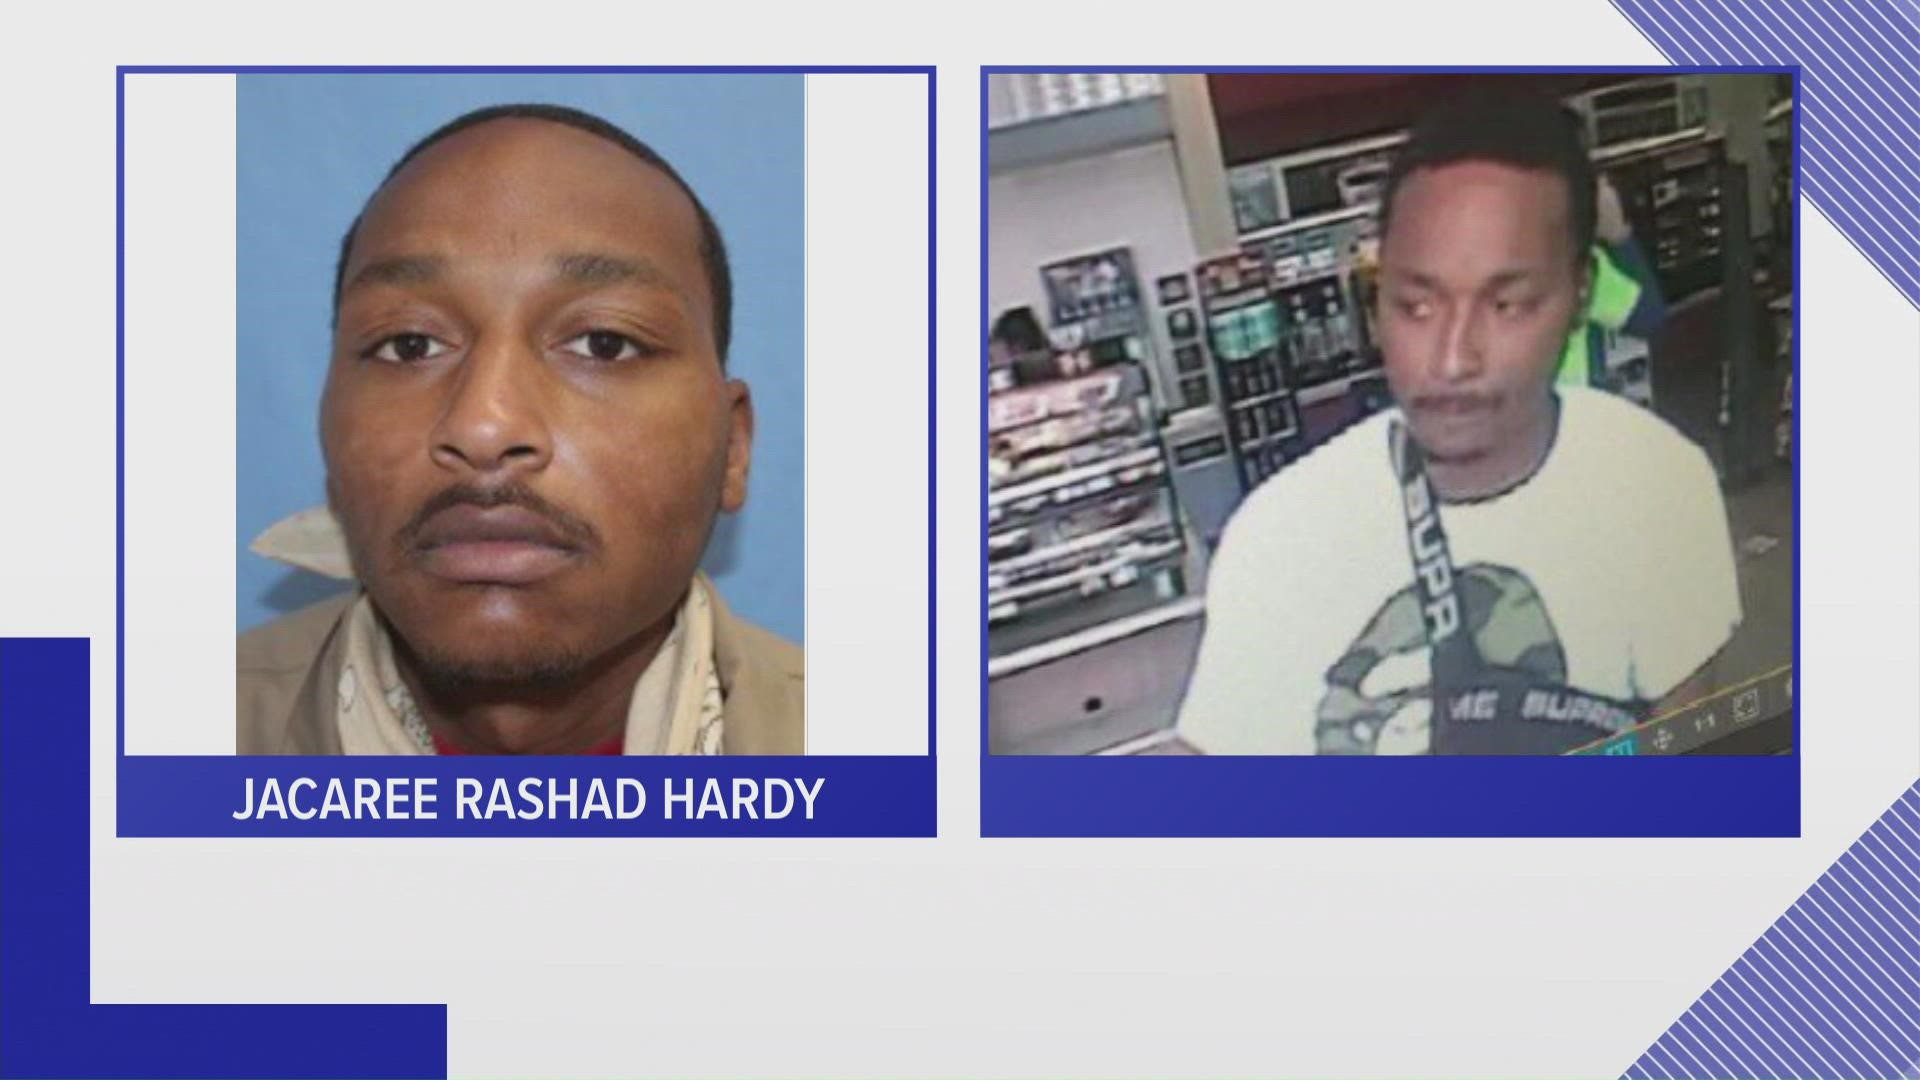 Police are searching for Jacaree Rashad Hardy, 23, who is a suspect in a murder in Seattle earlier this month.